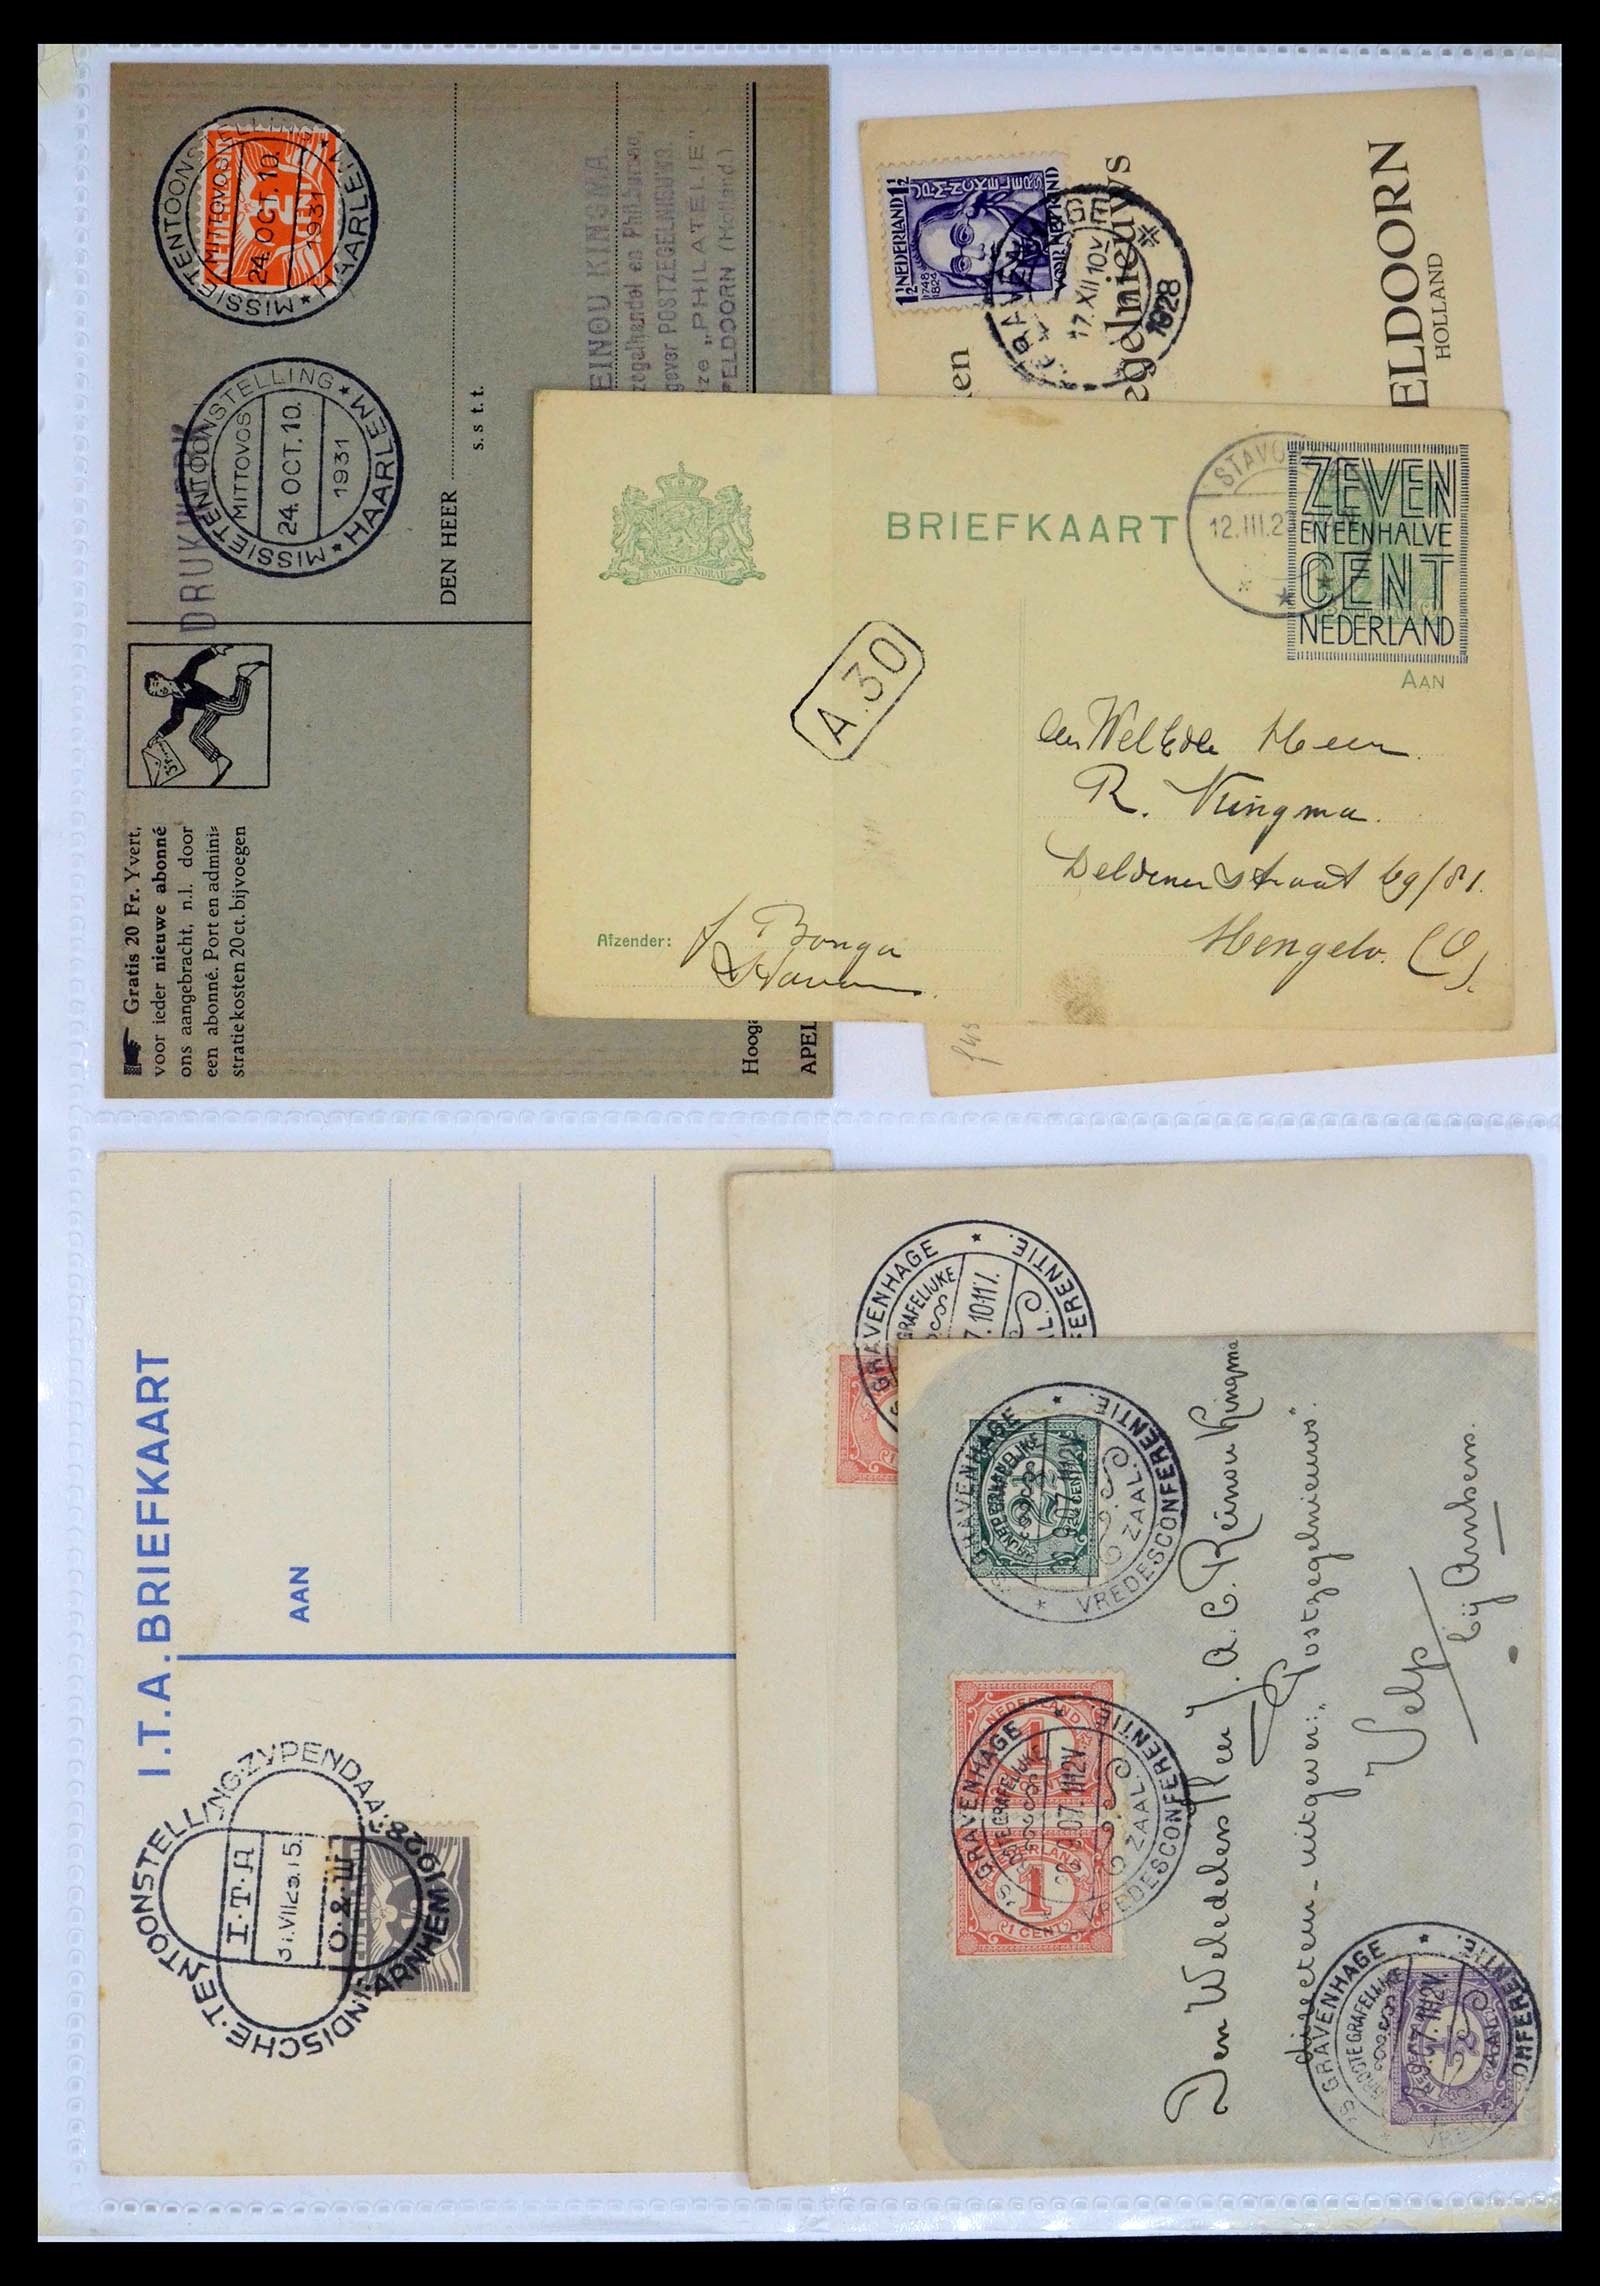 39429 0043 - Stamp collection 39429 Netherlands covers 1821-1955.